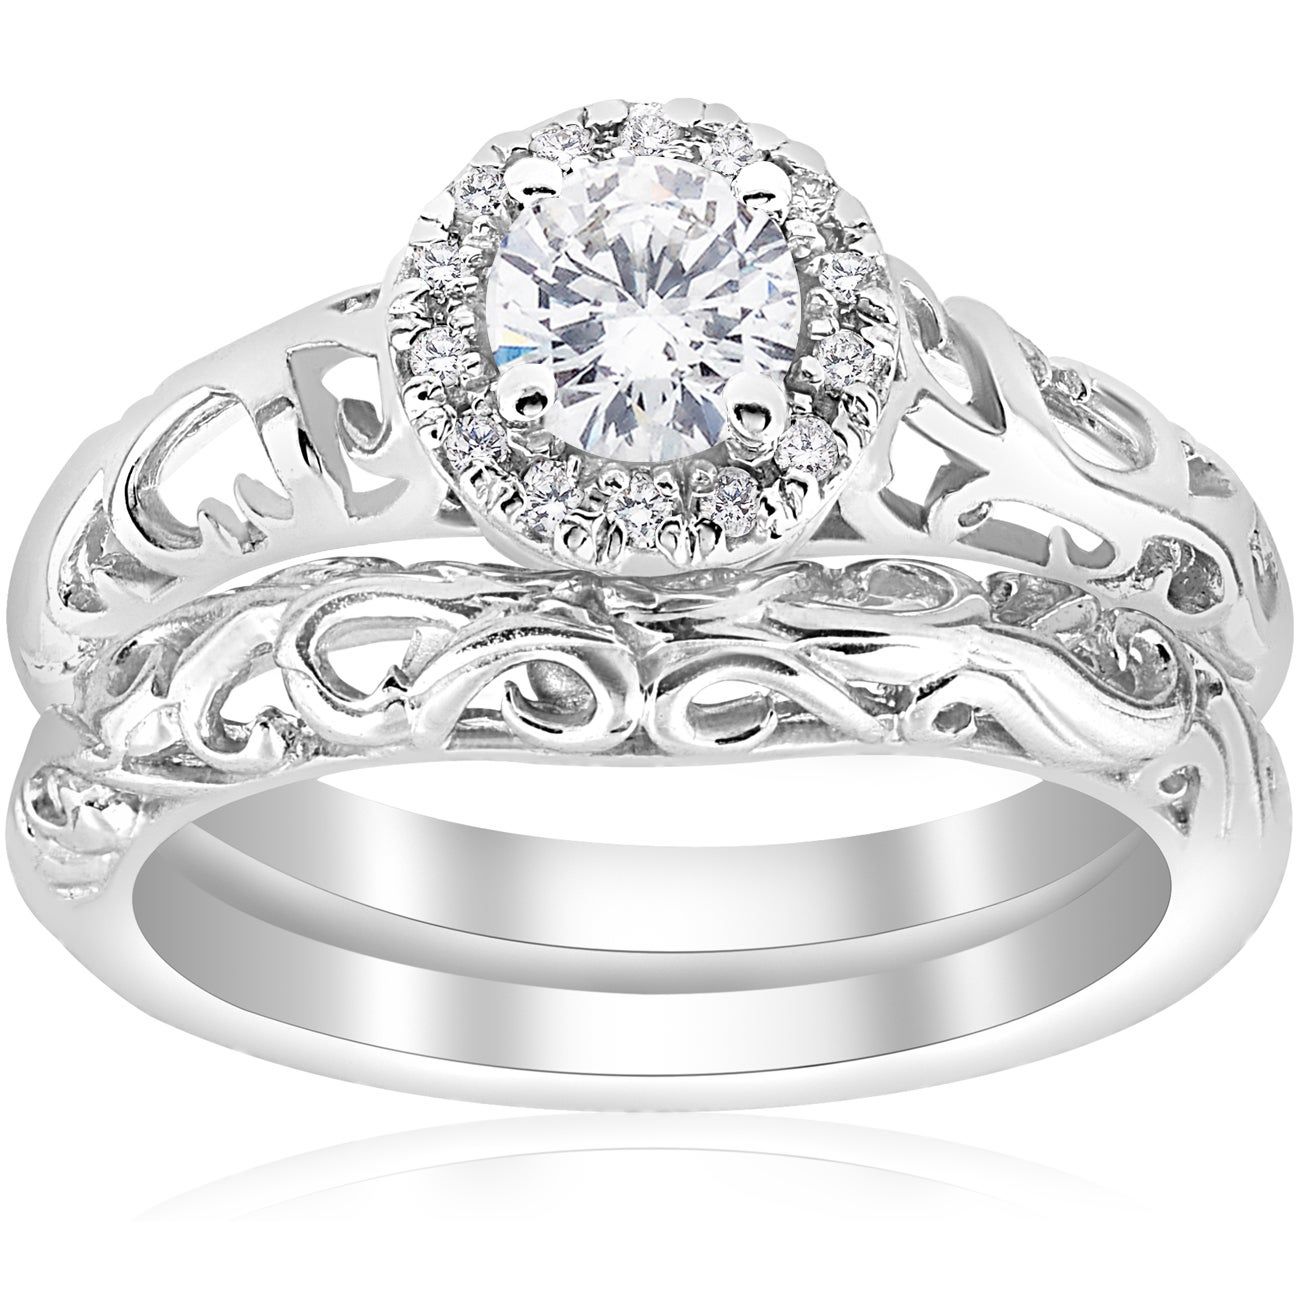 4 5 Mm Engagement Rings | Shop Online At Overstock Regarding Newest Composite Diamond Five Stone Anniversary Bands In White Gold (View 14 of 25)